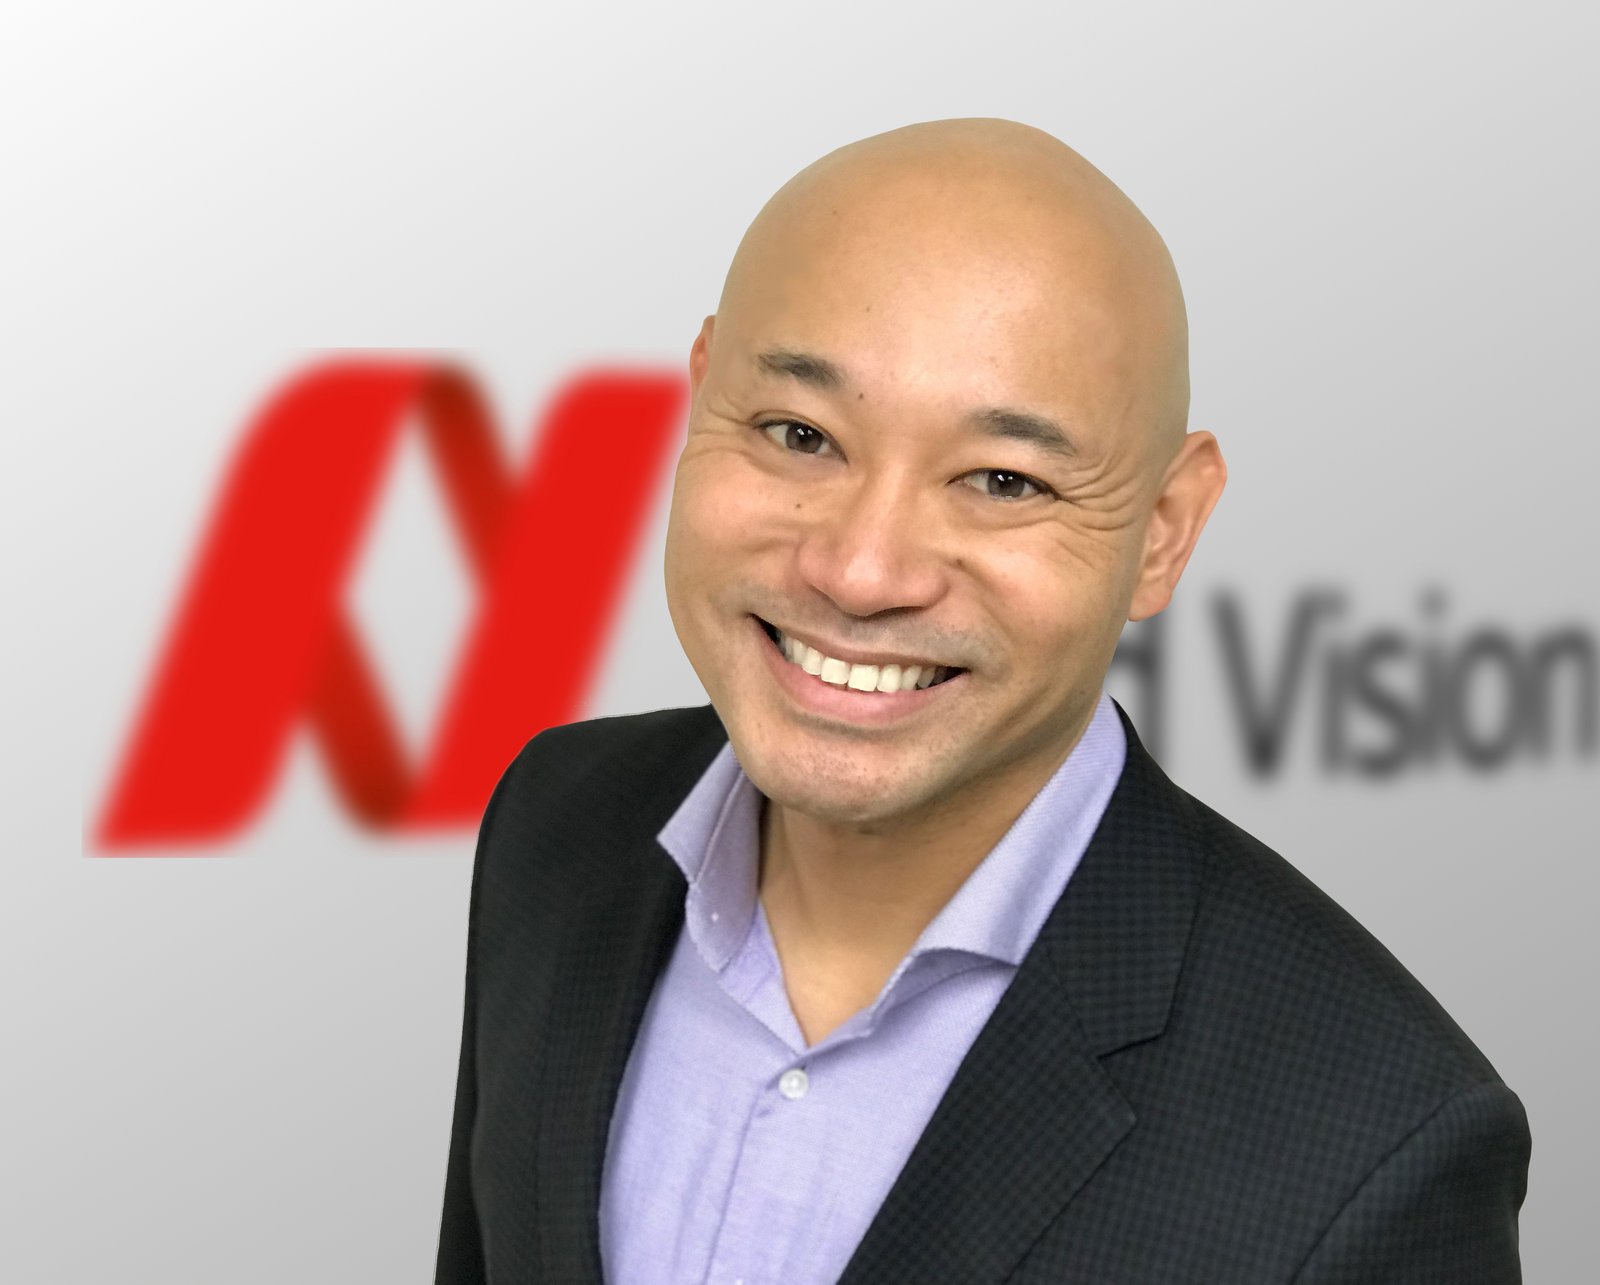 New Allied Vision Sales Manager, Matthew Hori